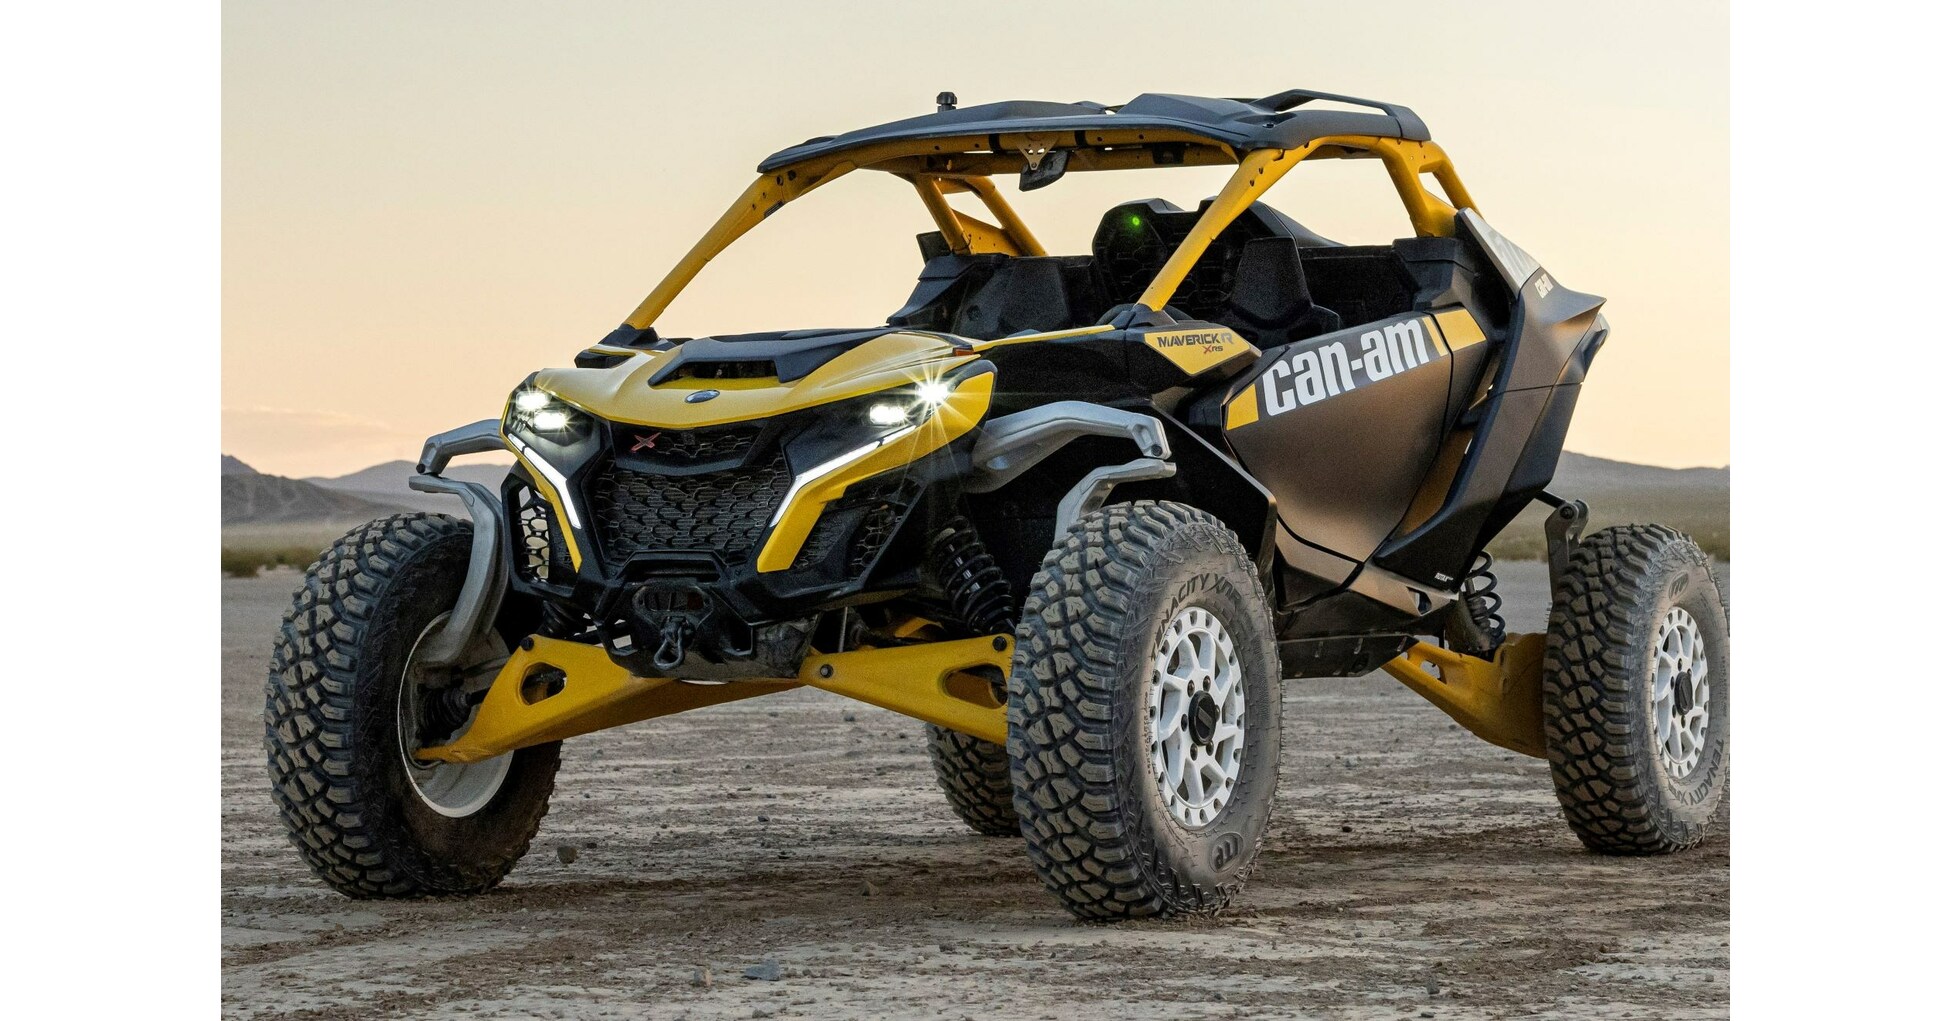 CANAM TRANSFORMS THE RIDER EXPERIENCE AND PERFORMANCE WITH THE ALL NEW